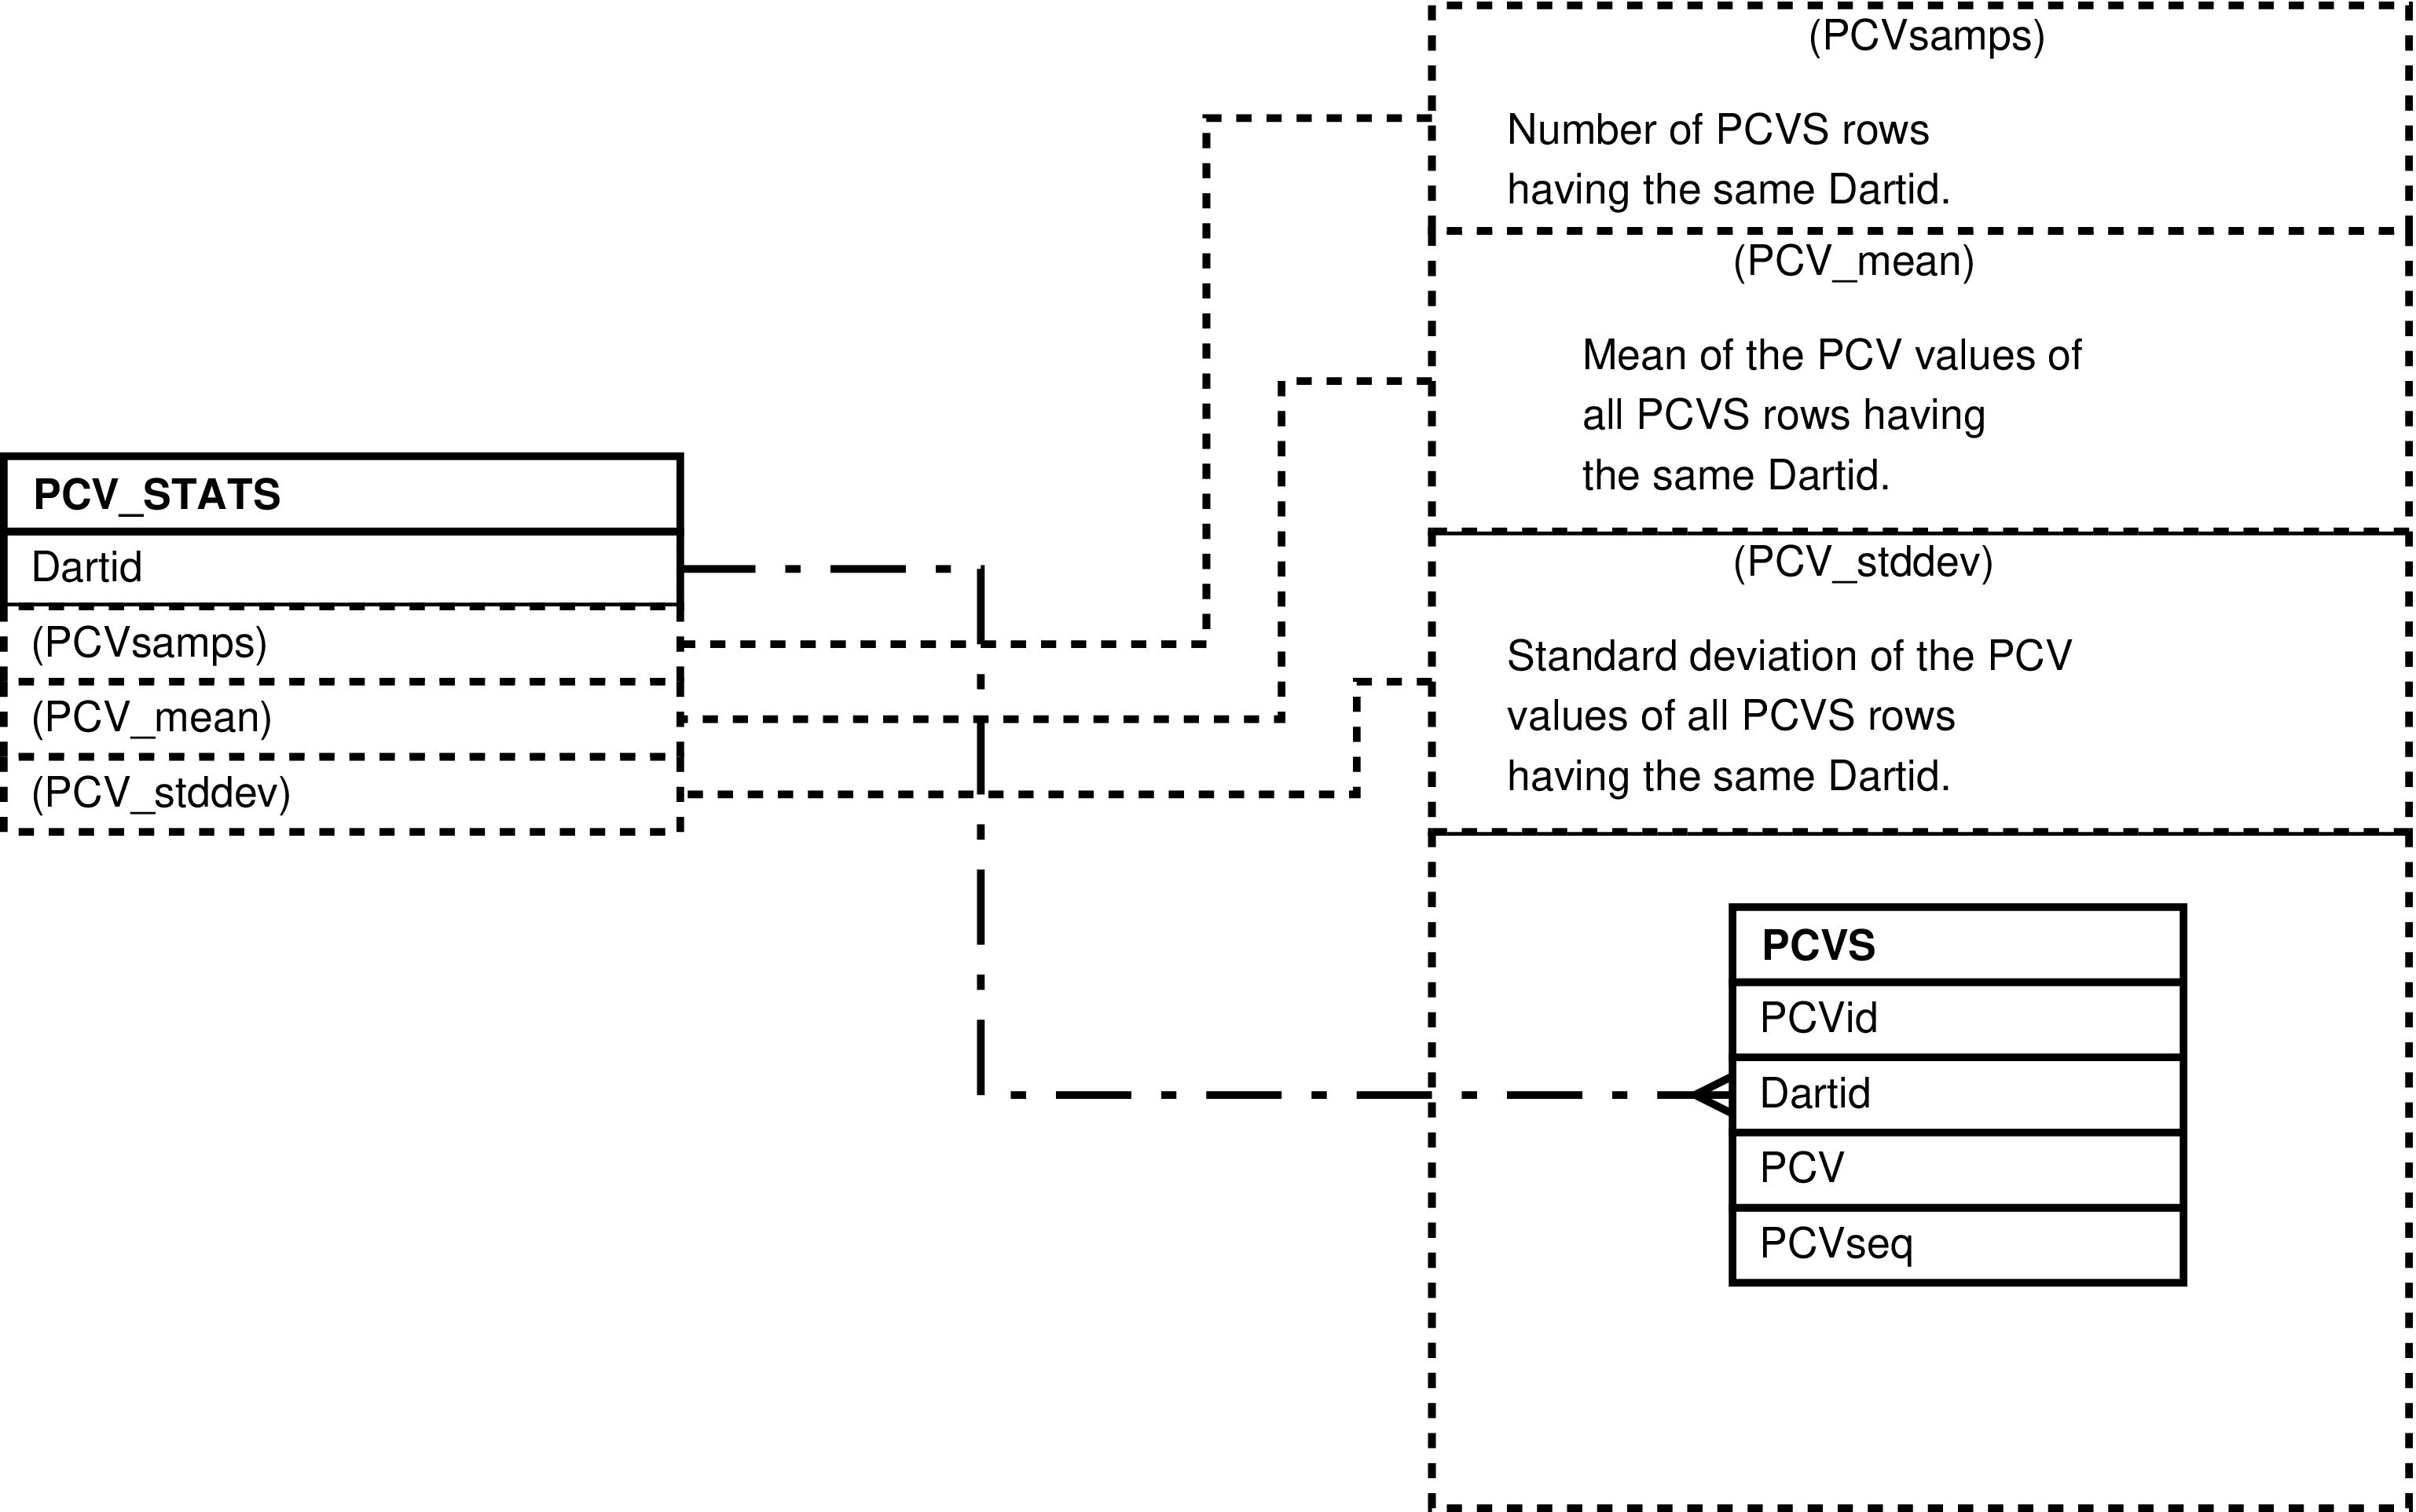 If we could we would display here the diagram showing how the PCV_STATS view is constructed.